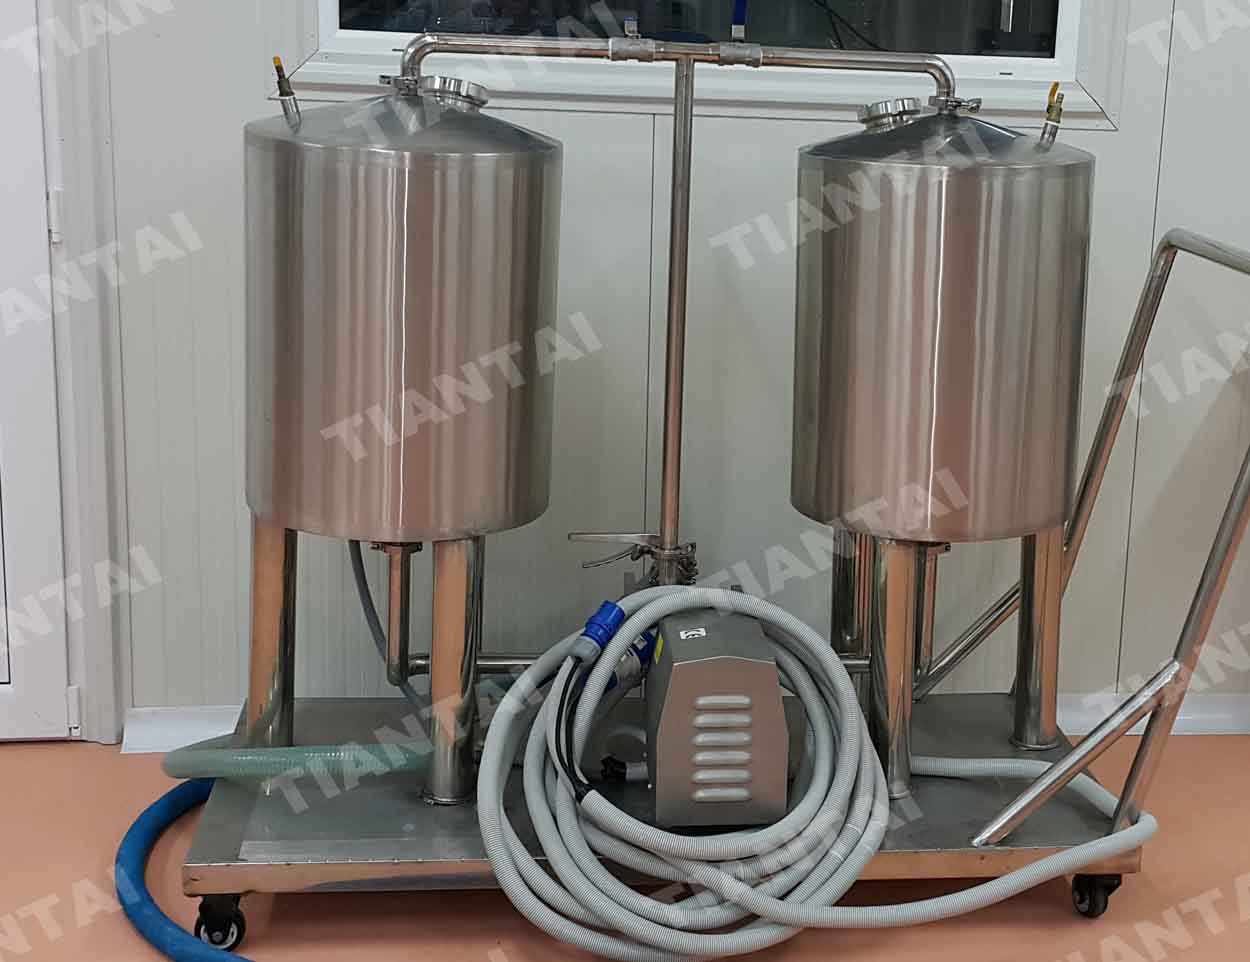 <b>How will the cleaning agents influence the beer brewery equipment?</b>